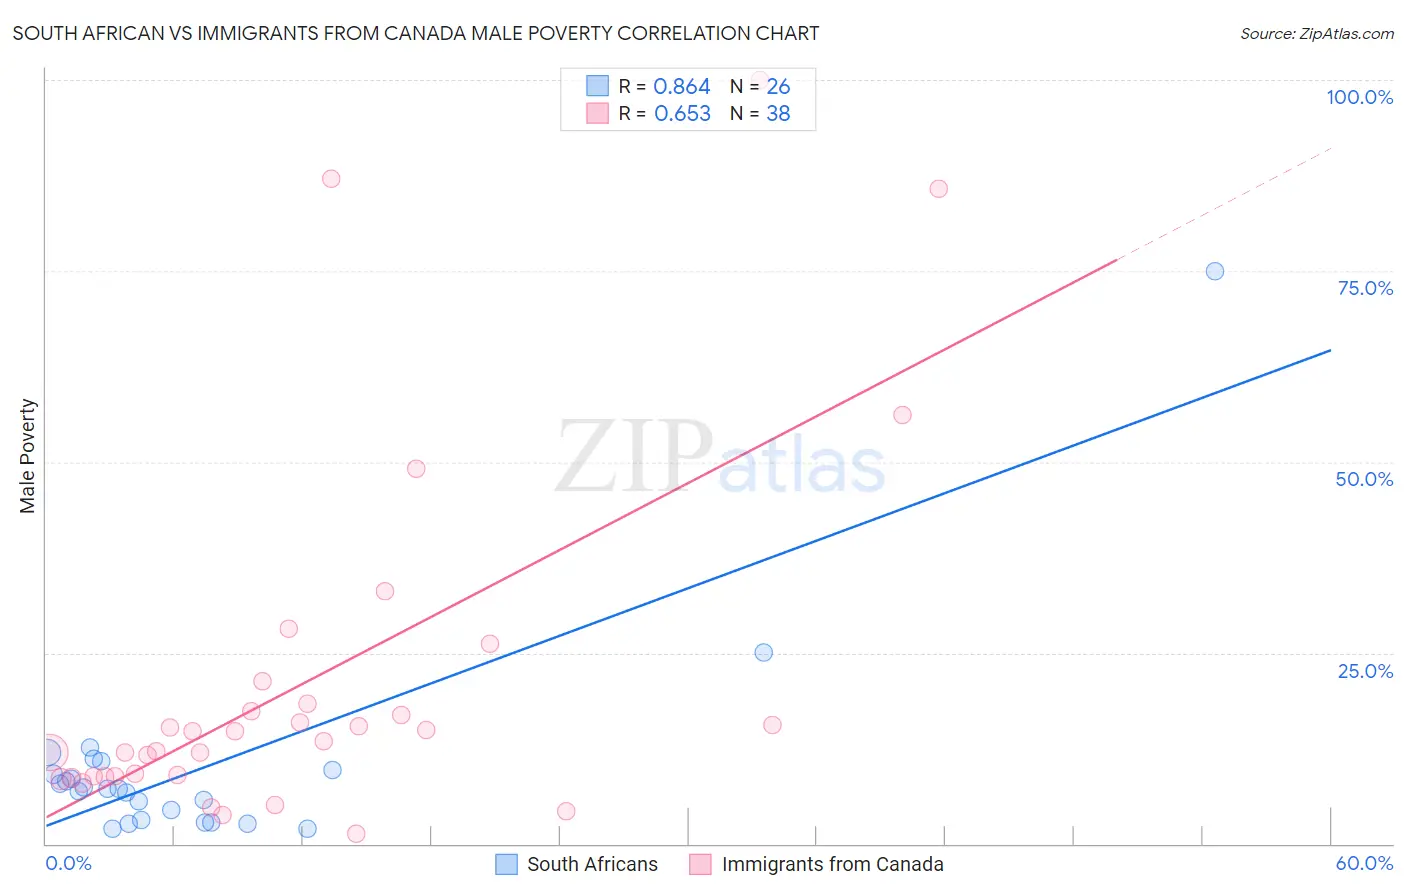 South African vs Immigrants from Canada Male Poverty